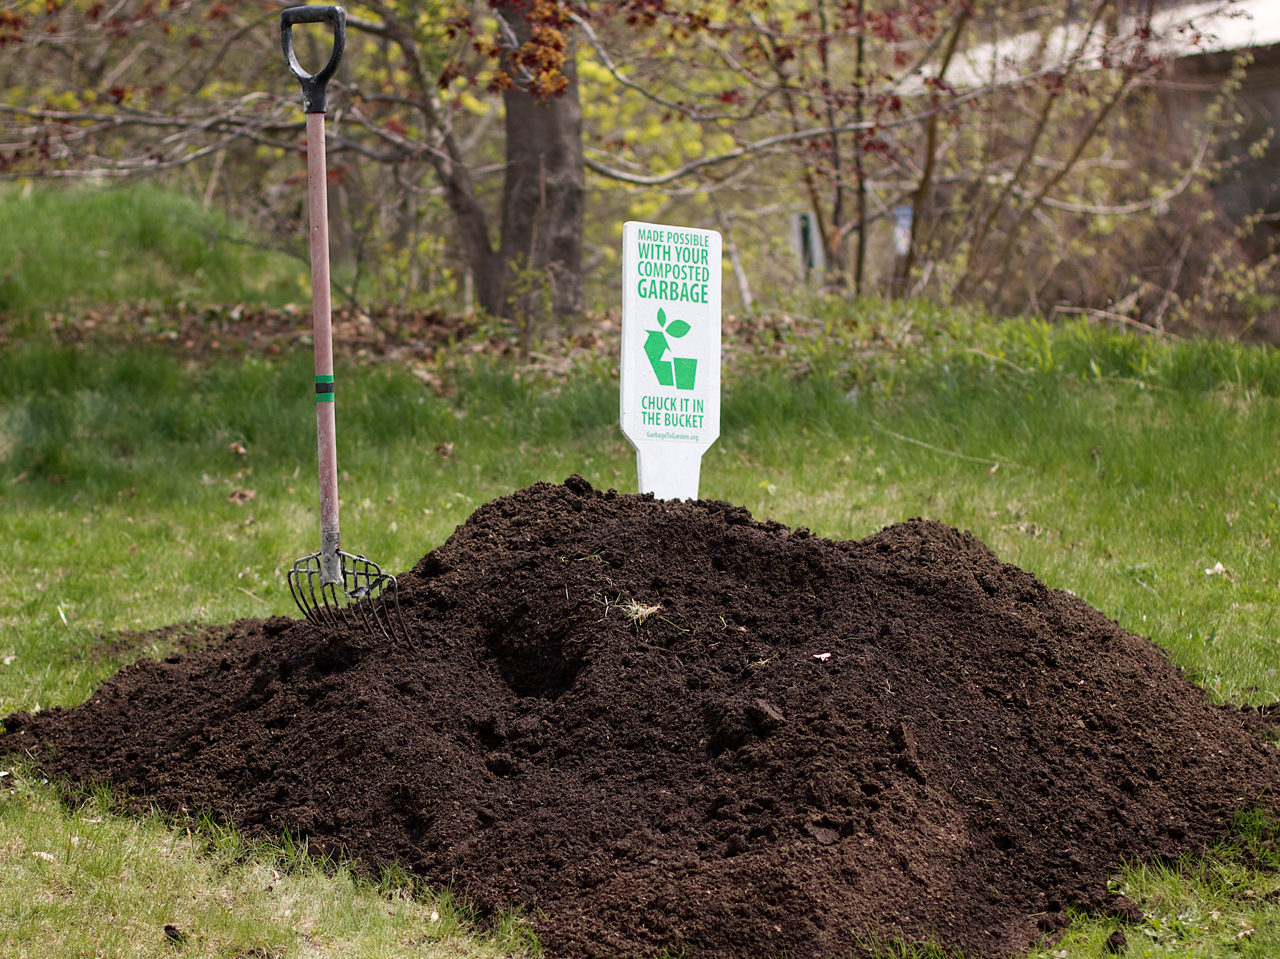 Finished compost, made possible with your food scraps